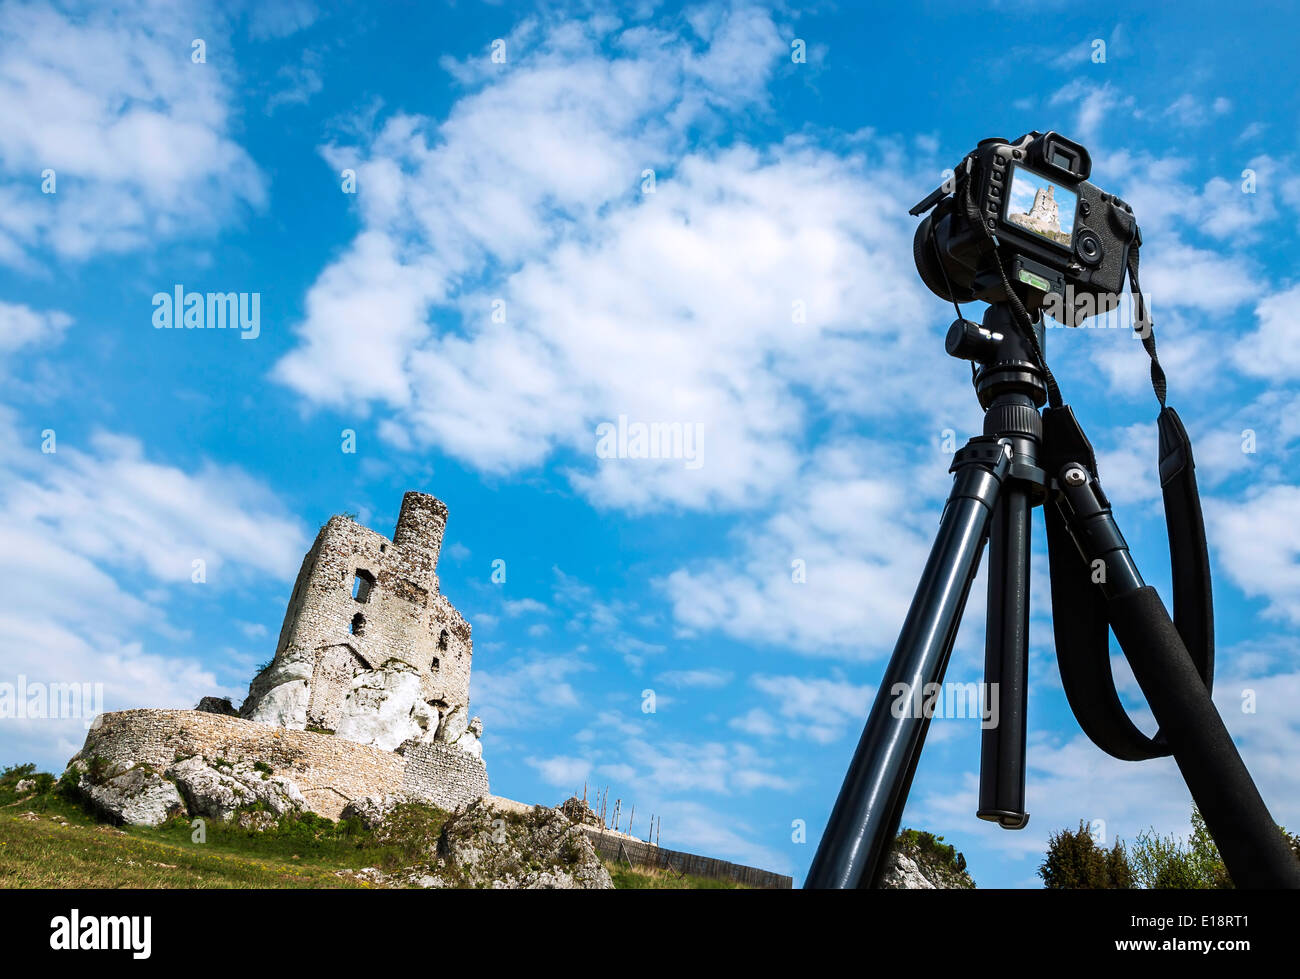 Making postcard, camera on tripod takes pictures of summer landscape with castle. Stock Photo